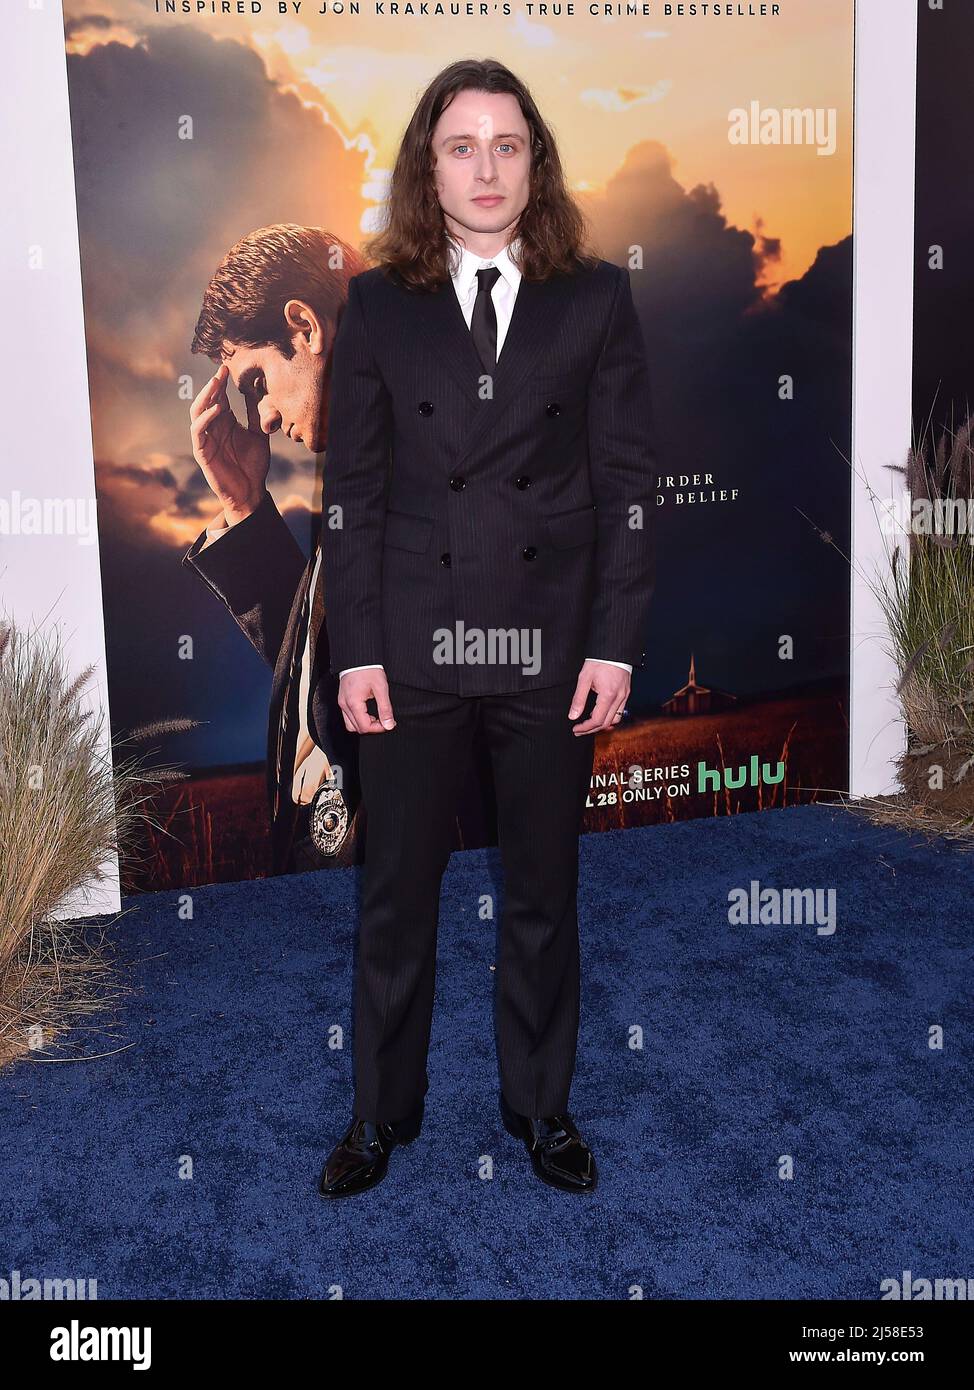 Hollywood, Ca. 20th Apr, 2022. Rory Culkin attends Premiere Of FX's 'Under The Banner Of Heaven' at The Hollywood Athletic Club on April 20, 2022 in Hollywood, California. Credit: Jeffrey Mayer/Jtm Photos/Media Punch/Alamy Live News Stock Photo